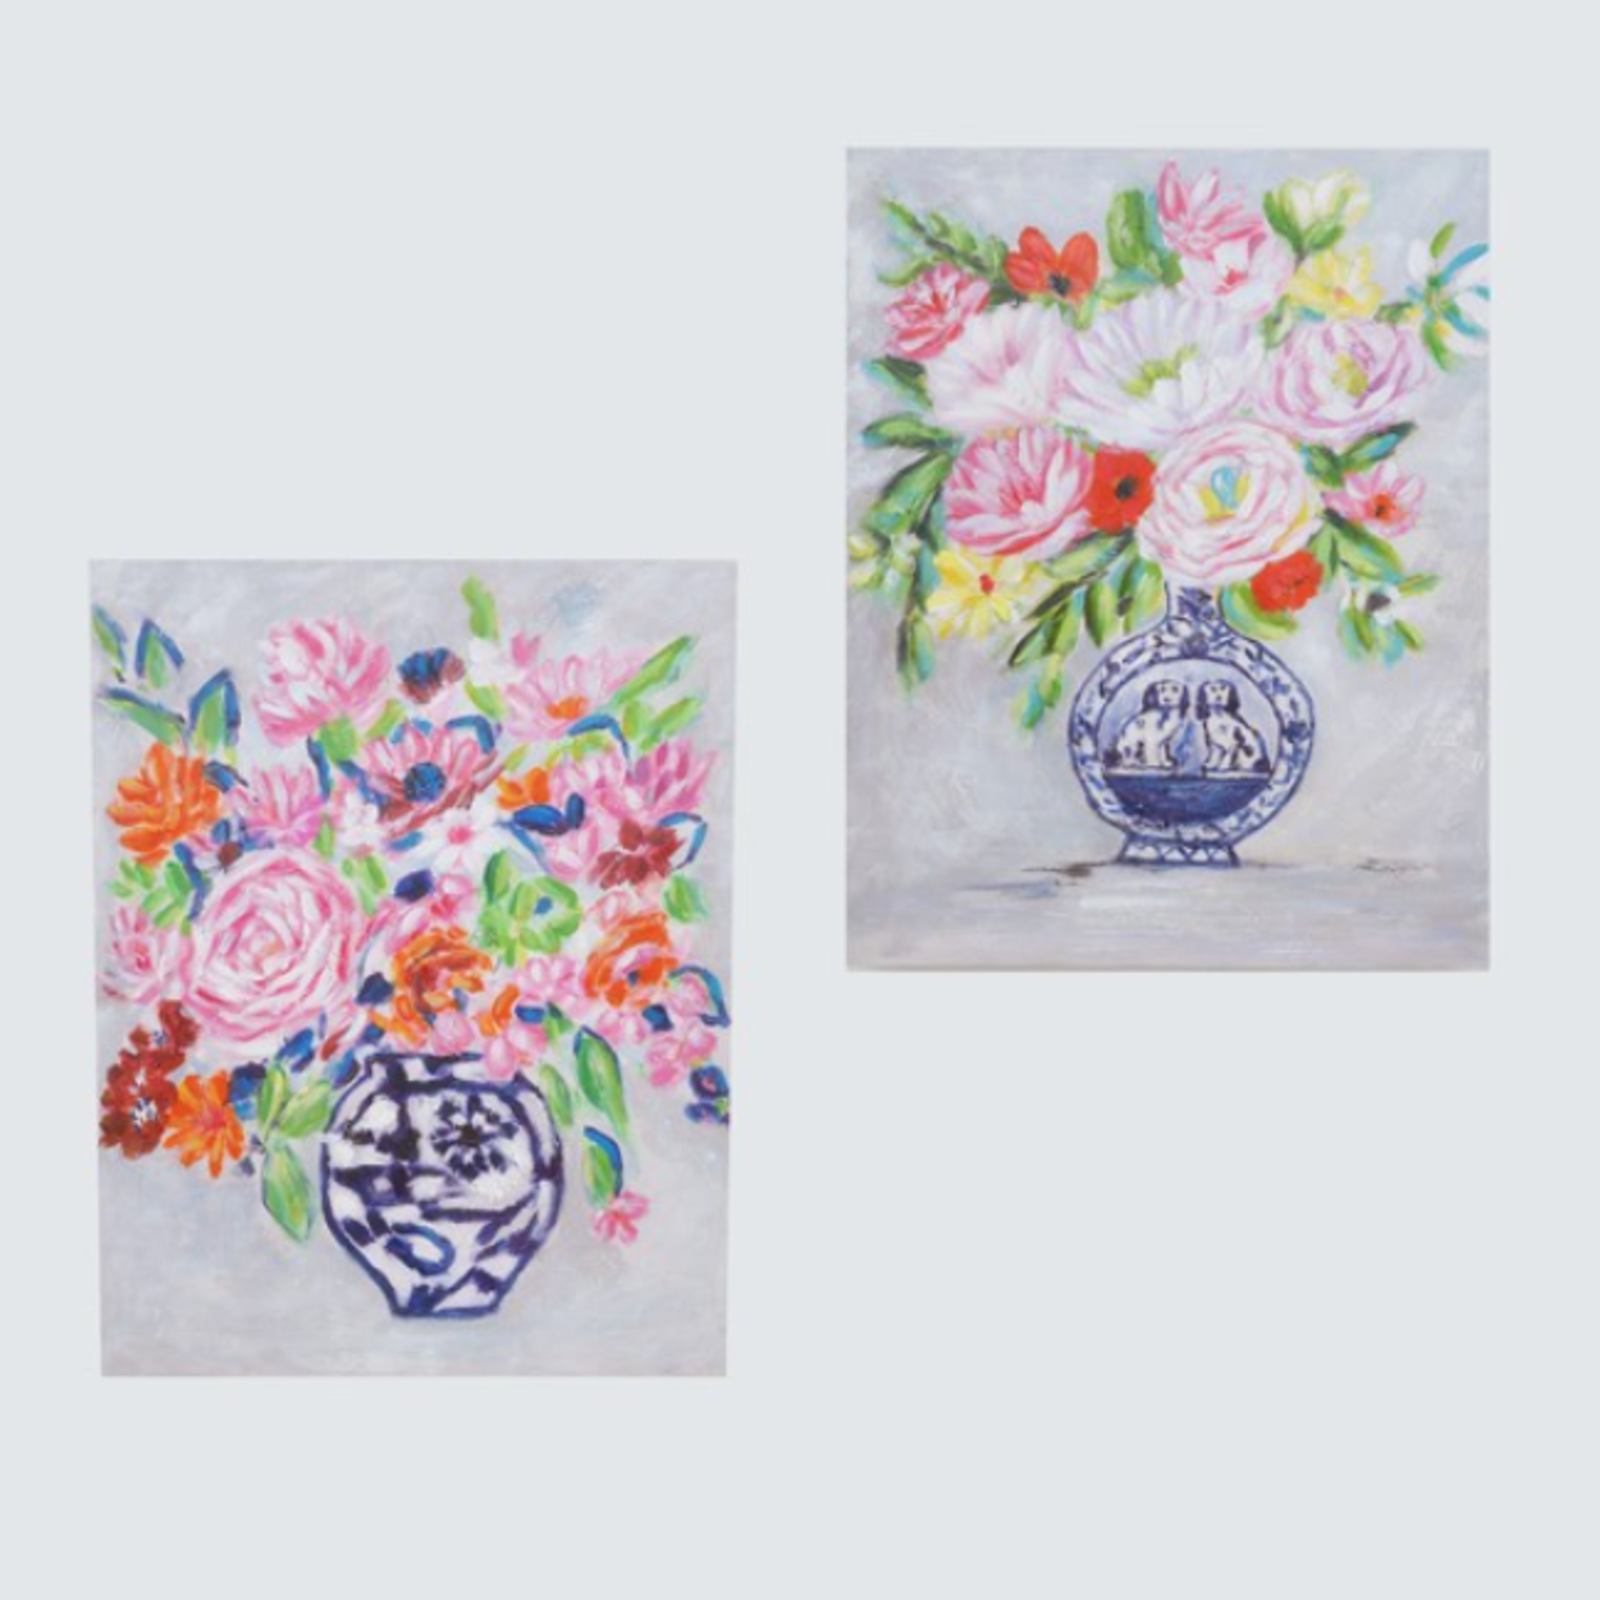 Tawyna North 16x20" Floral Canvas, Blue White Vase  TN2036A loading=